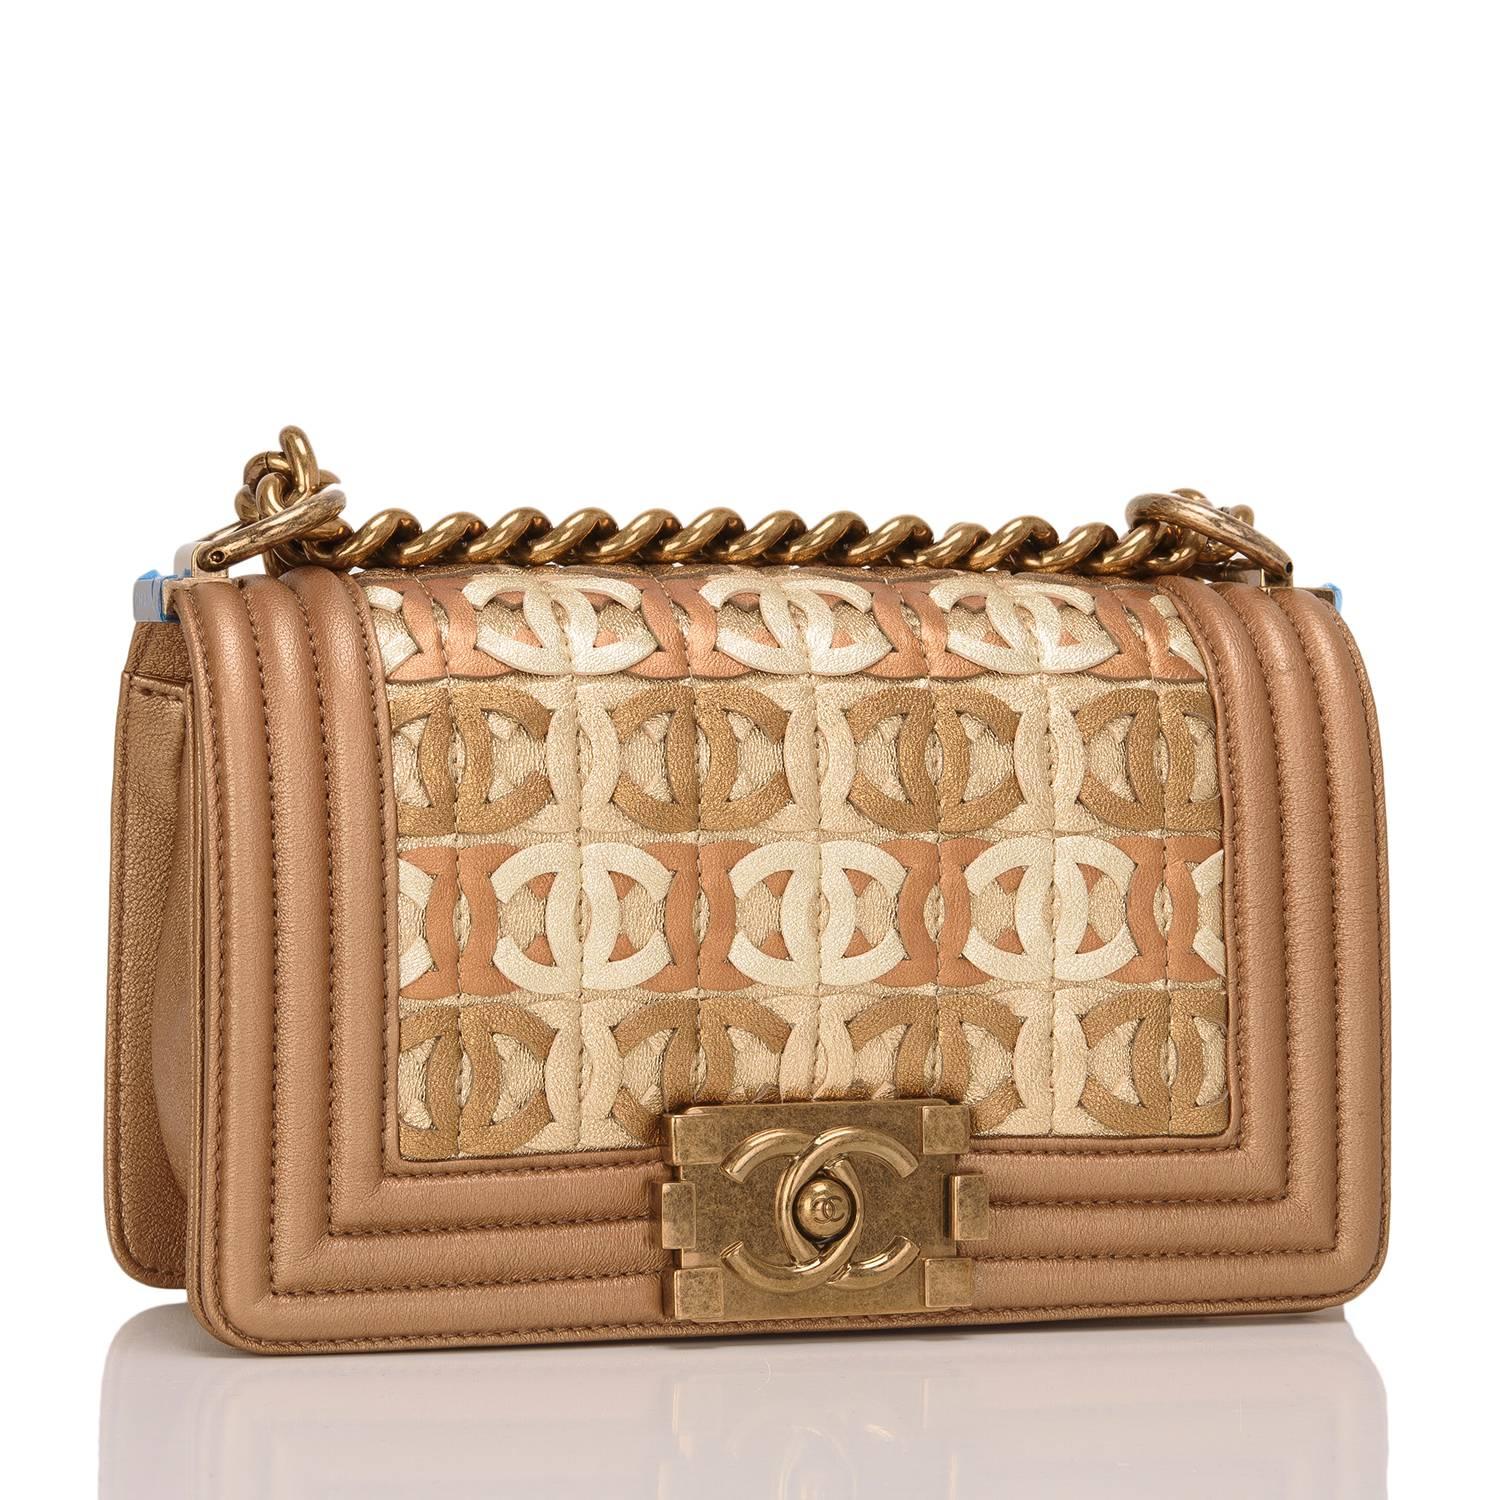 This Chanel CC embellished small Boy bag is made of dark gold metallic lambskin leather and accented with antique gold tone hardware. The bag features multi-tone metallic gold laser-cut CC logos intertwined in the body of the bag turning the CC